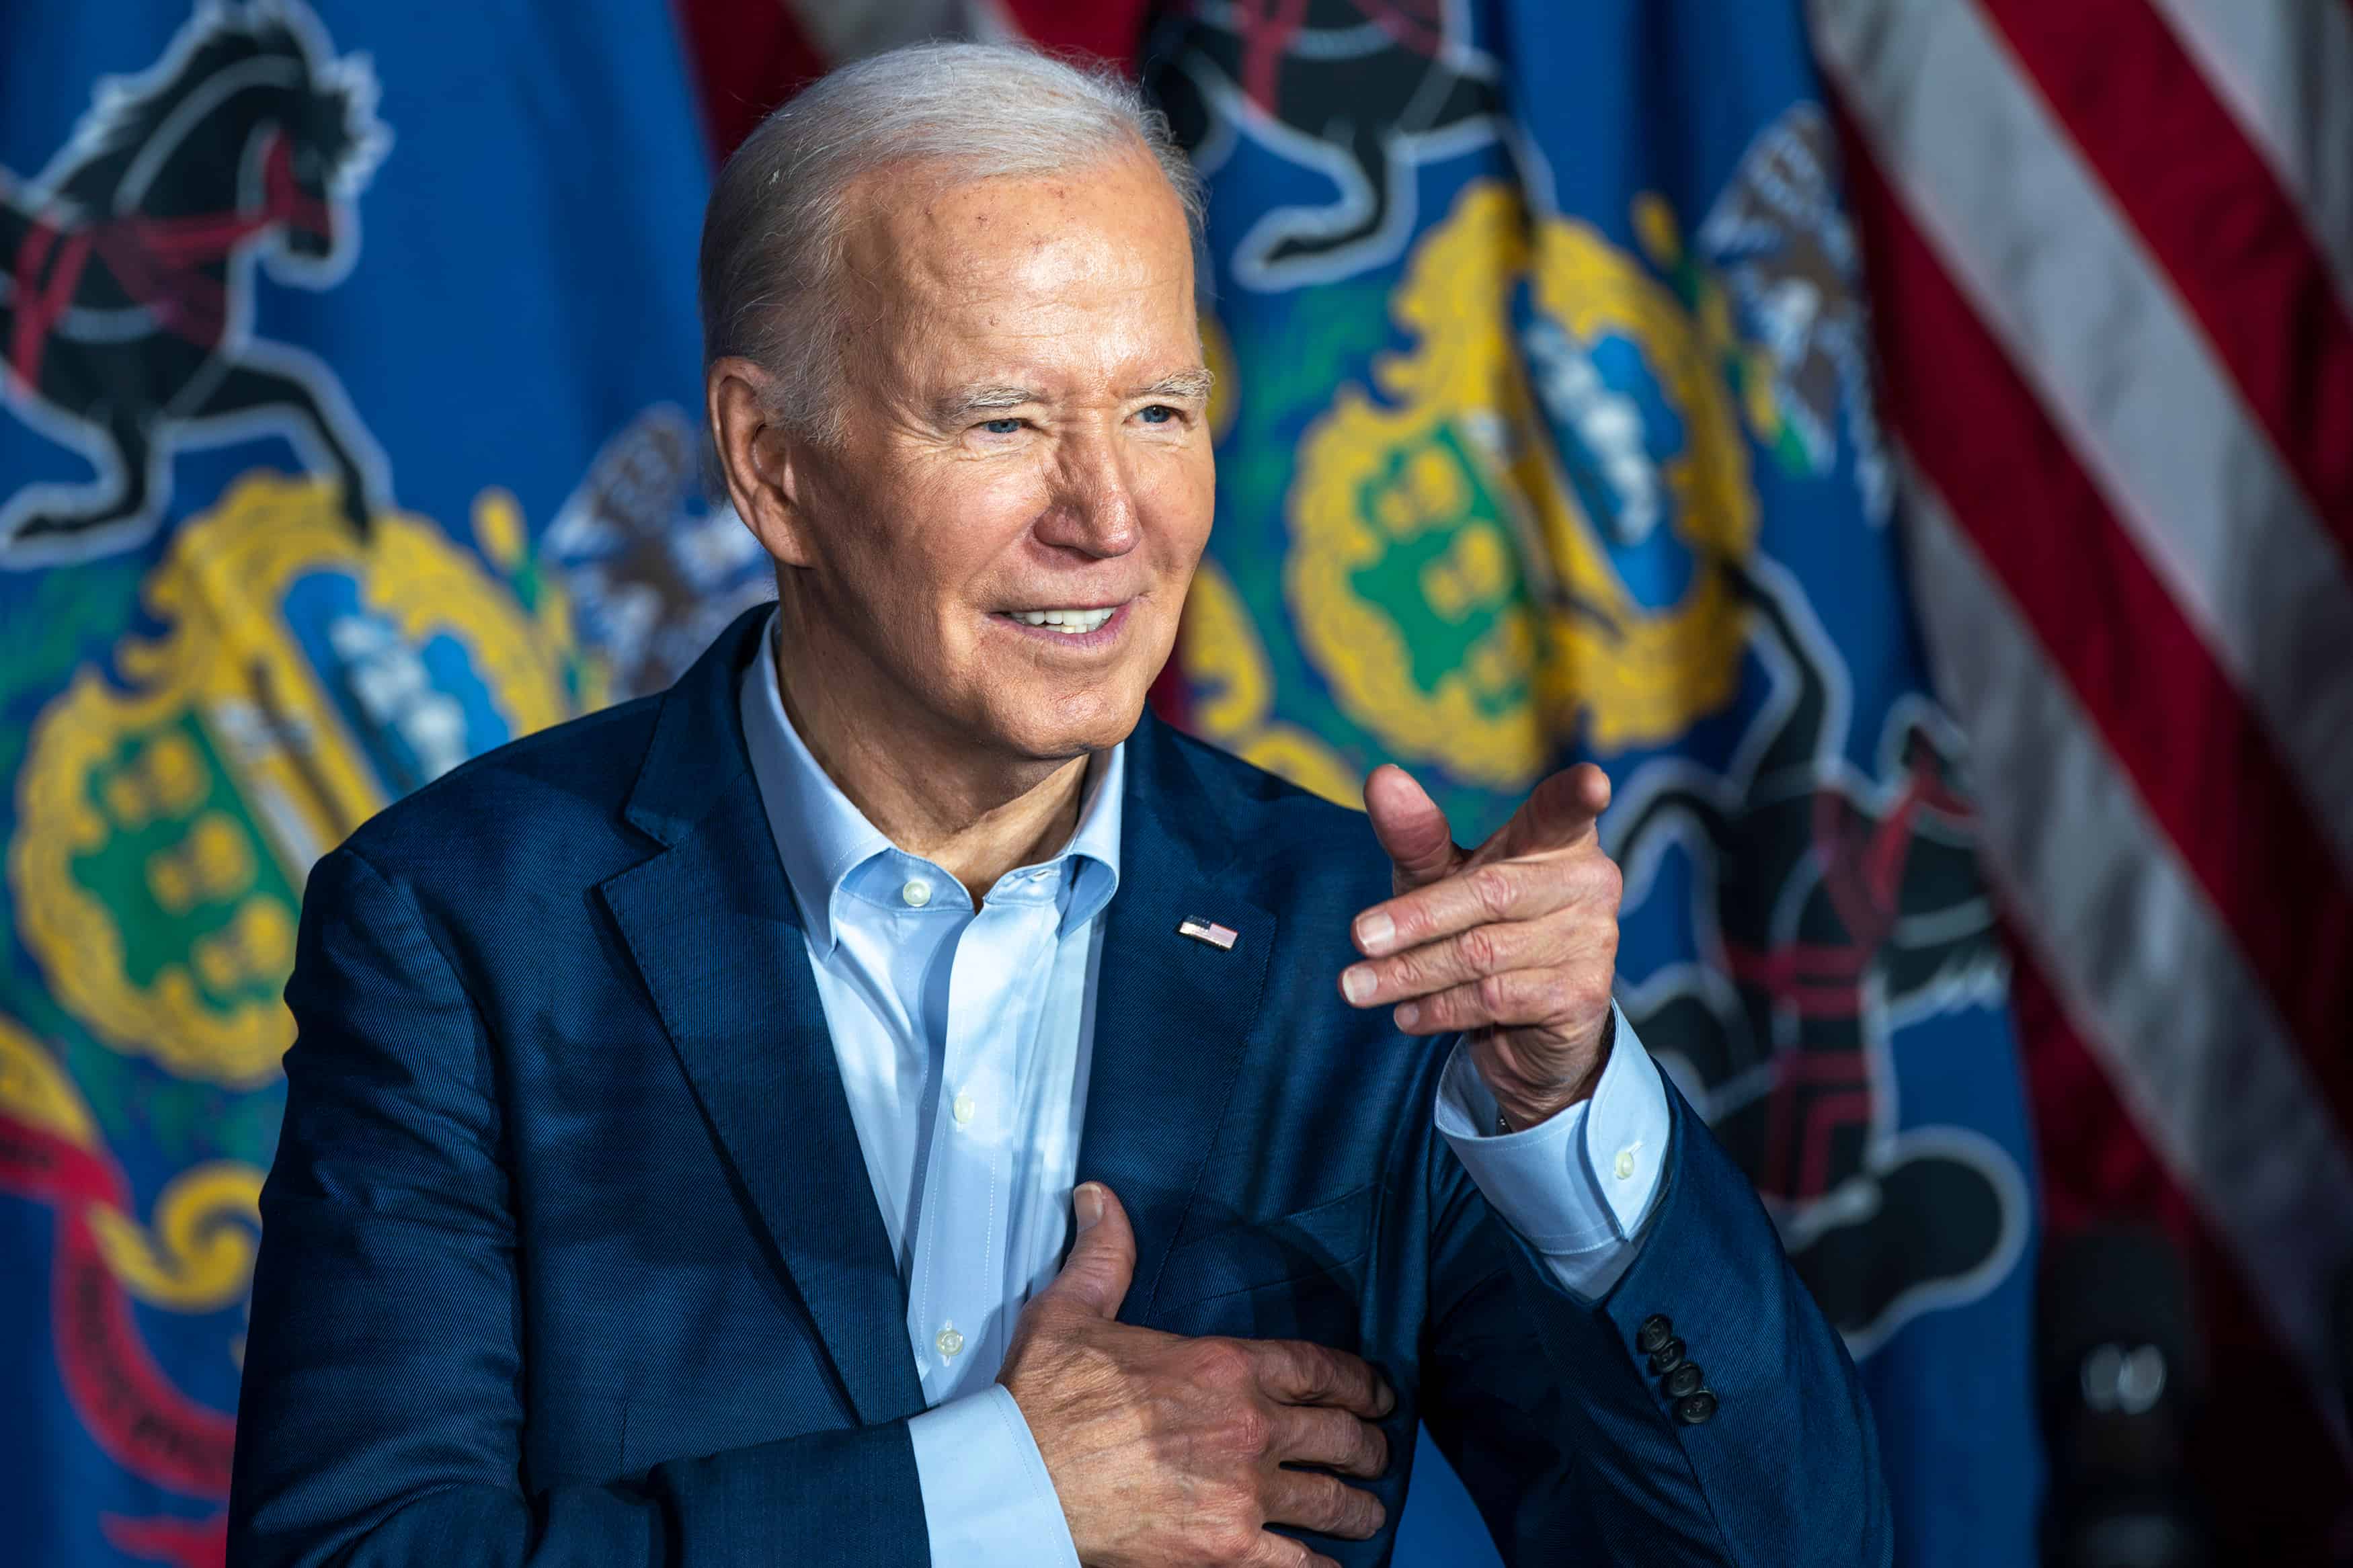 Biden Suggests 'Cannibals' Ate His Uncle in Papua New Guinea